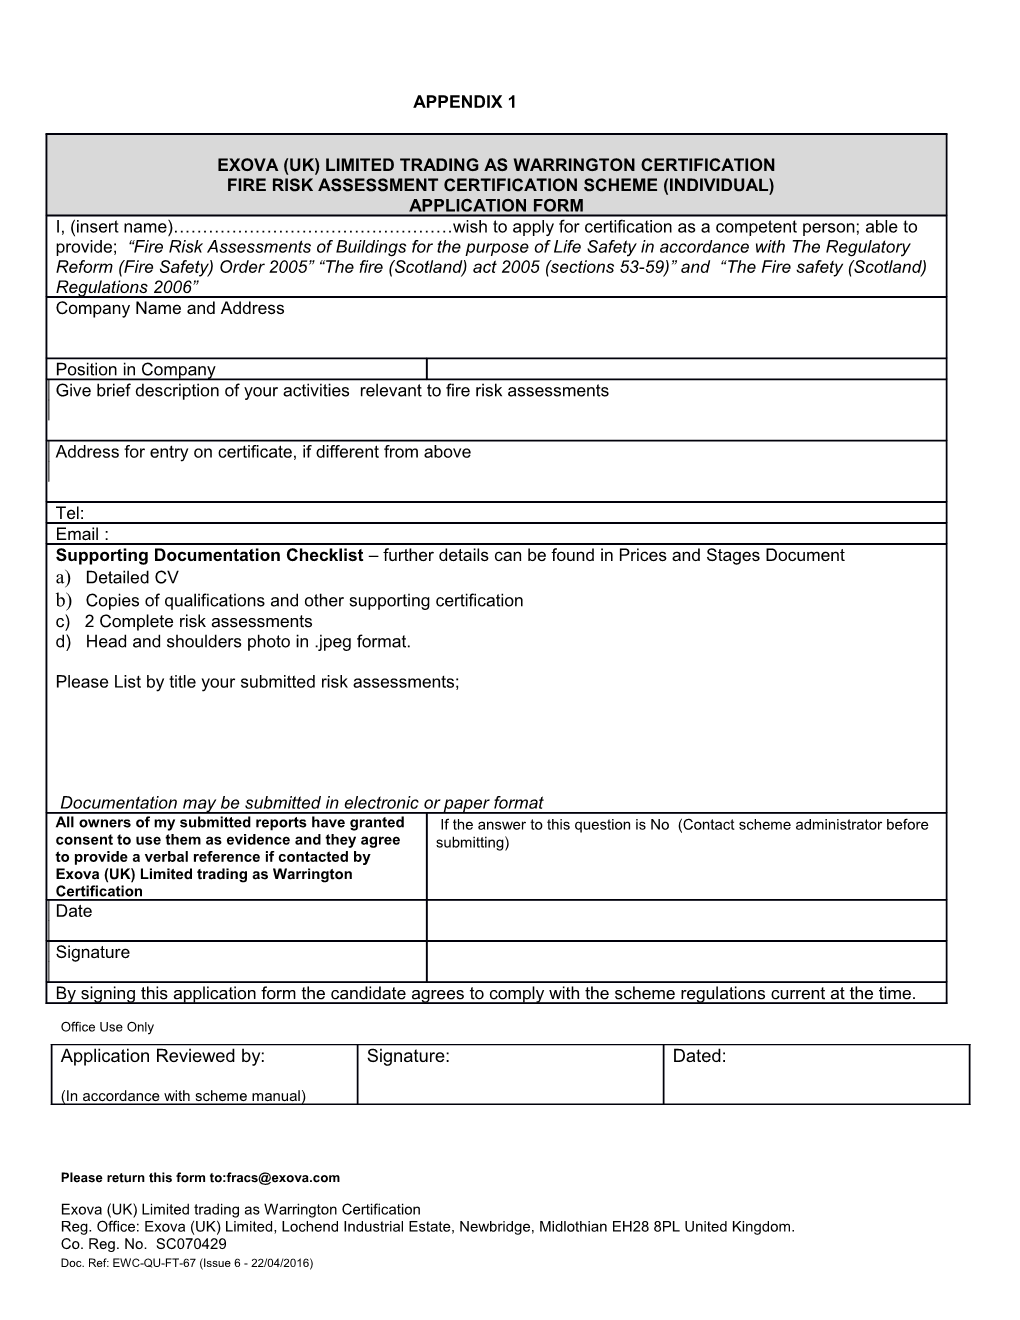 Please Return This Form To